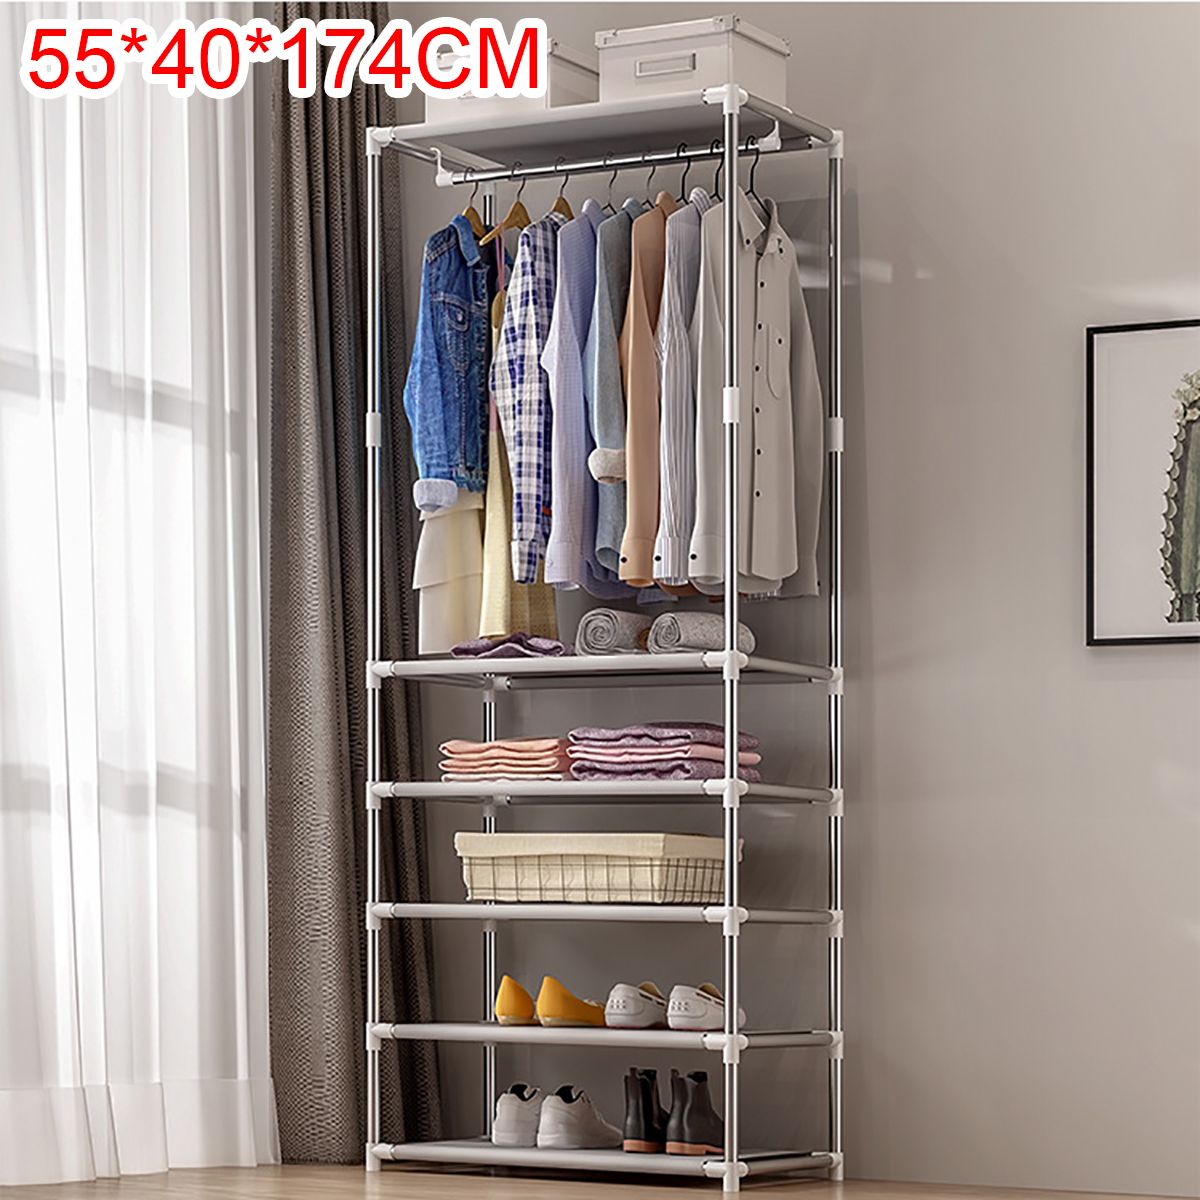 Simple Coat Rack Floor Clothes Hangers Creative Clothing Rack Shelf Easy Assembly Bedroom Hanging Clothing Racks Fashion Home Decorations 24